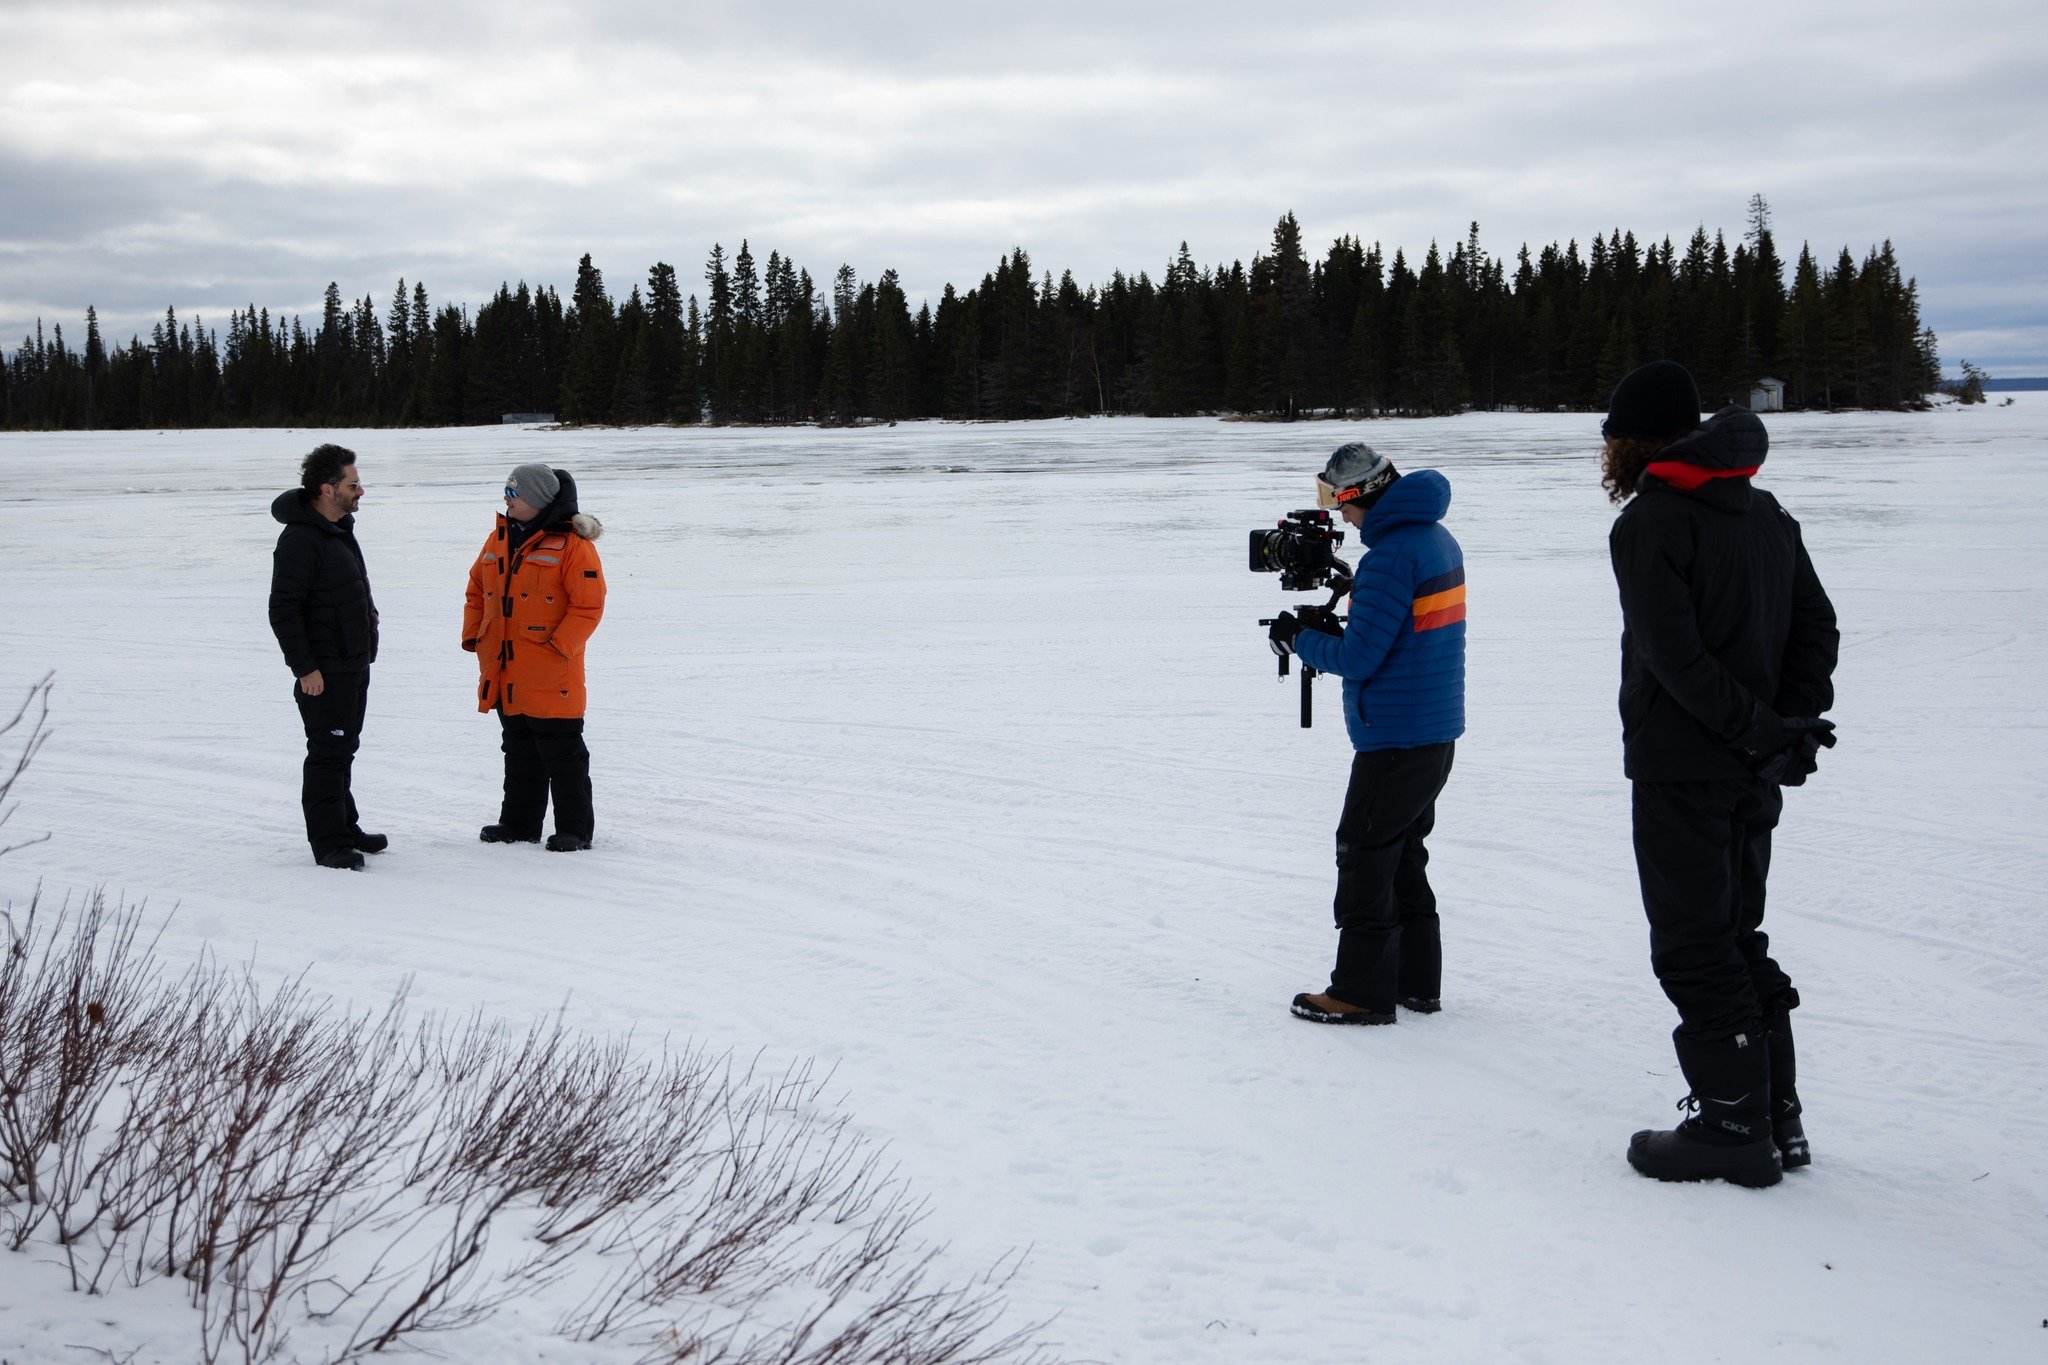 Did you know that our executive director, @valeriecourtois is featured on @pbs new international docuseries?! Here&rsquo;s a behind-the-scenes look of filming the episode of &lsquo;A Brief History of the Future&rsquo; that took place in Labrador! In 